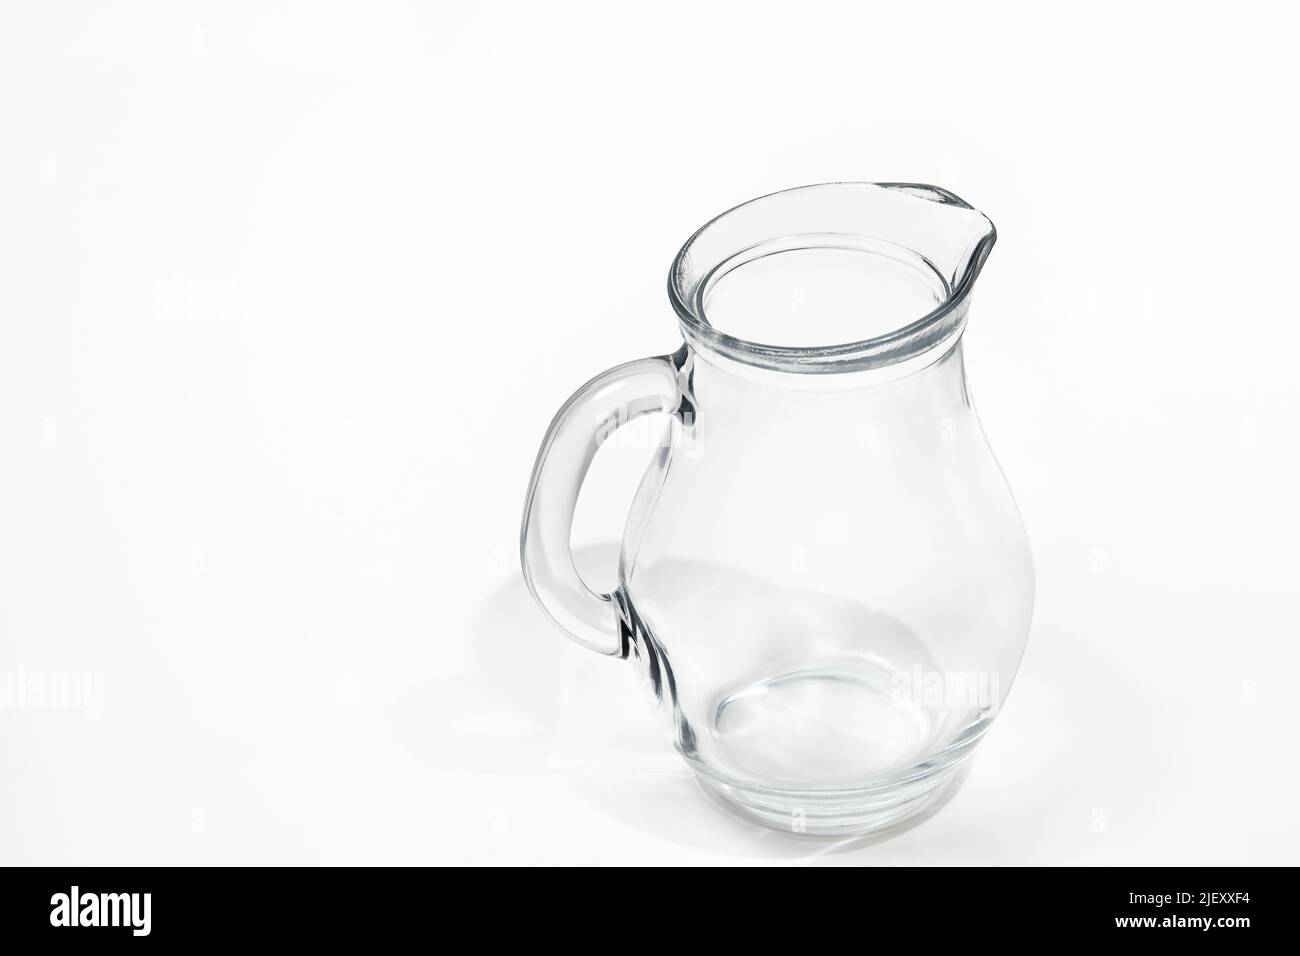 Water Pitcher Isolated On White With Clipping Path Stock Photo